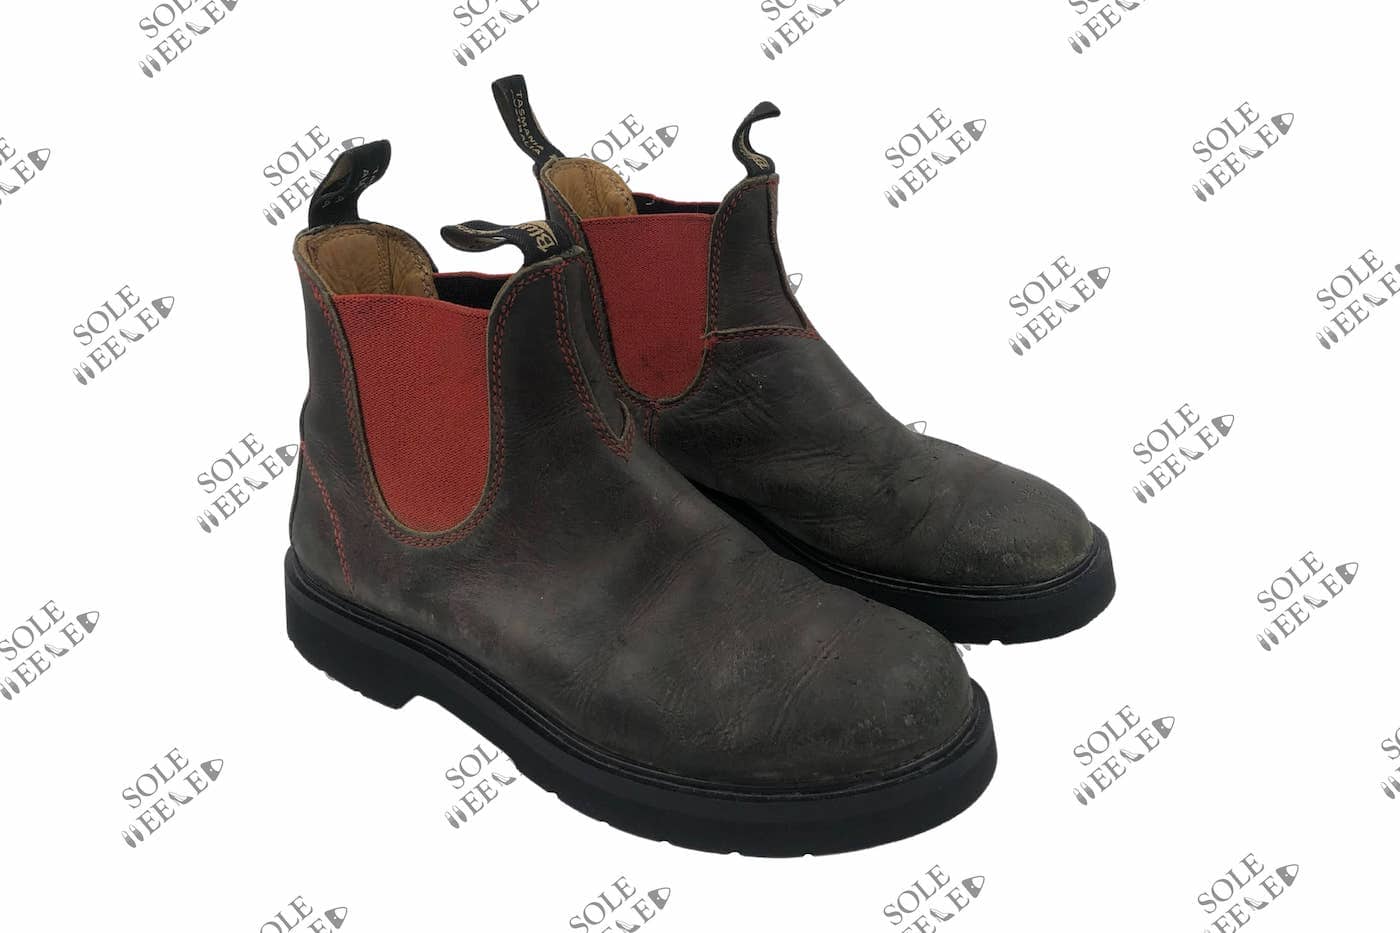 Blundstone Boot Sole Replacement